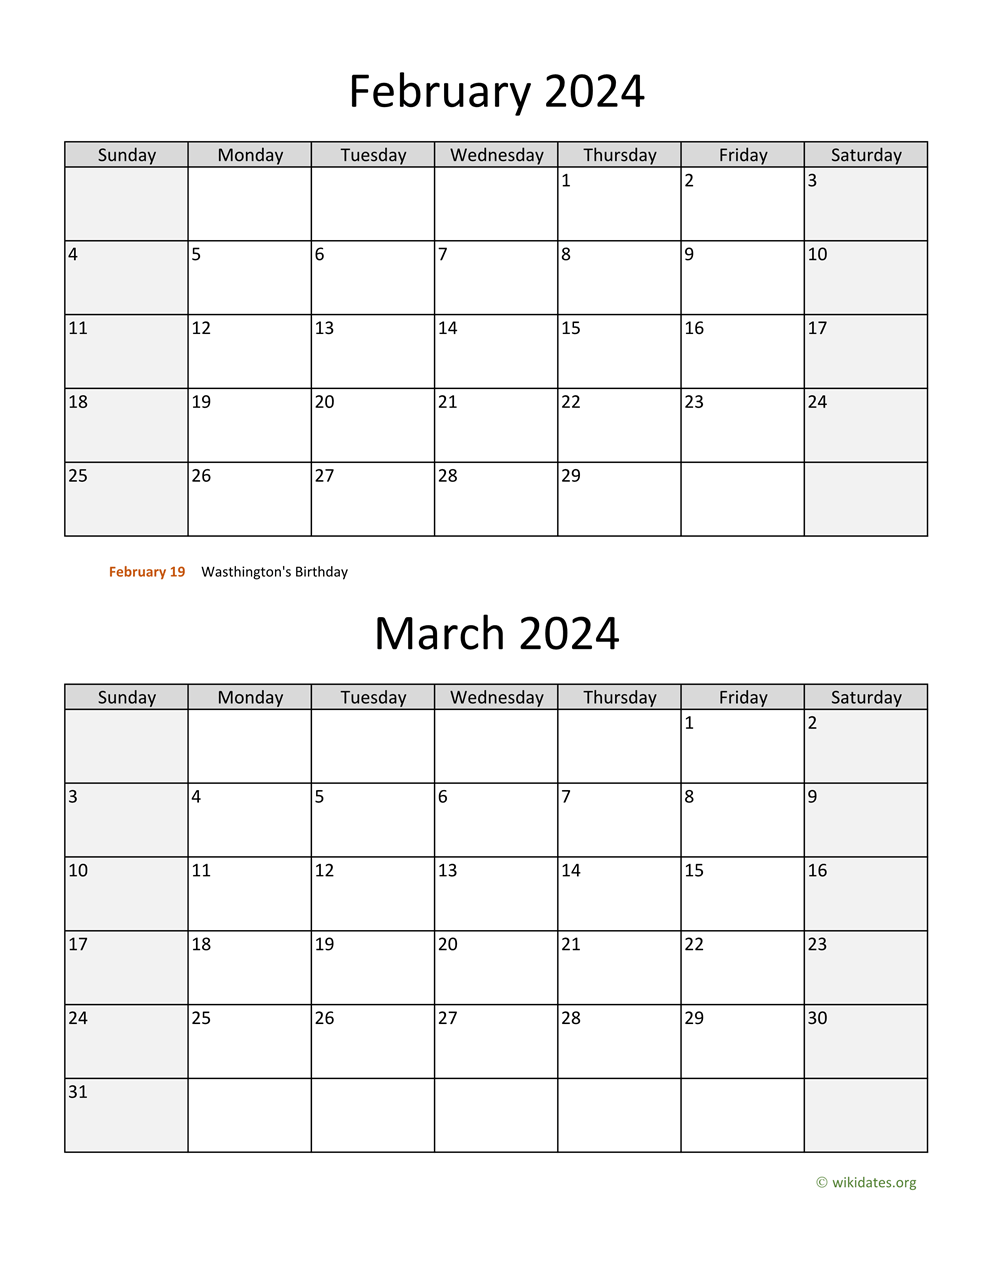 February And March 2024 Calendar | Wikidates for February And March 2024 Printable Calendar